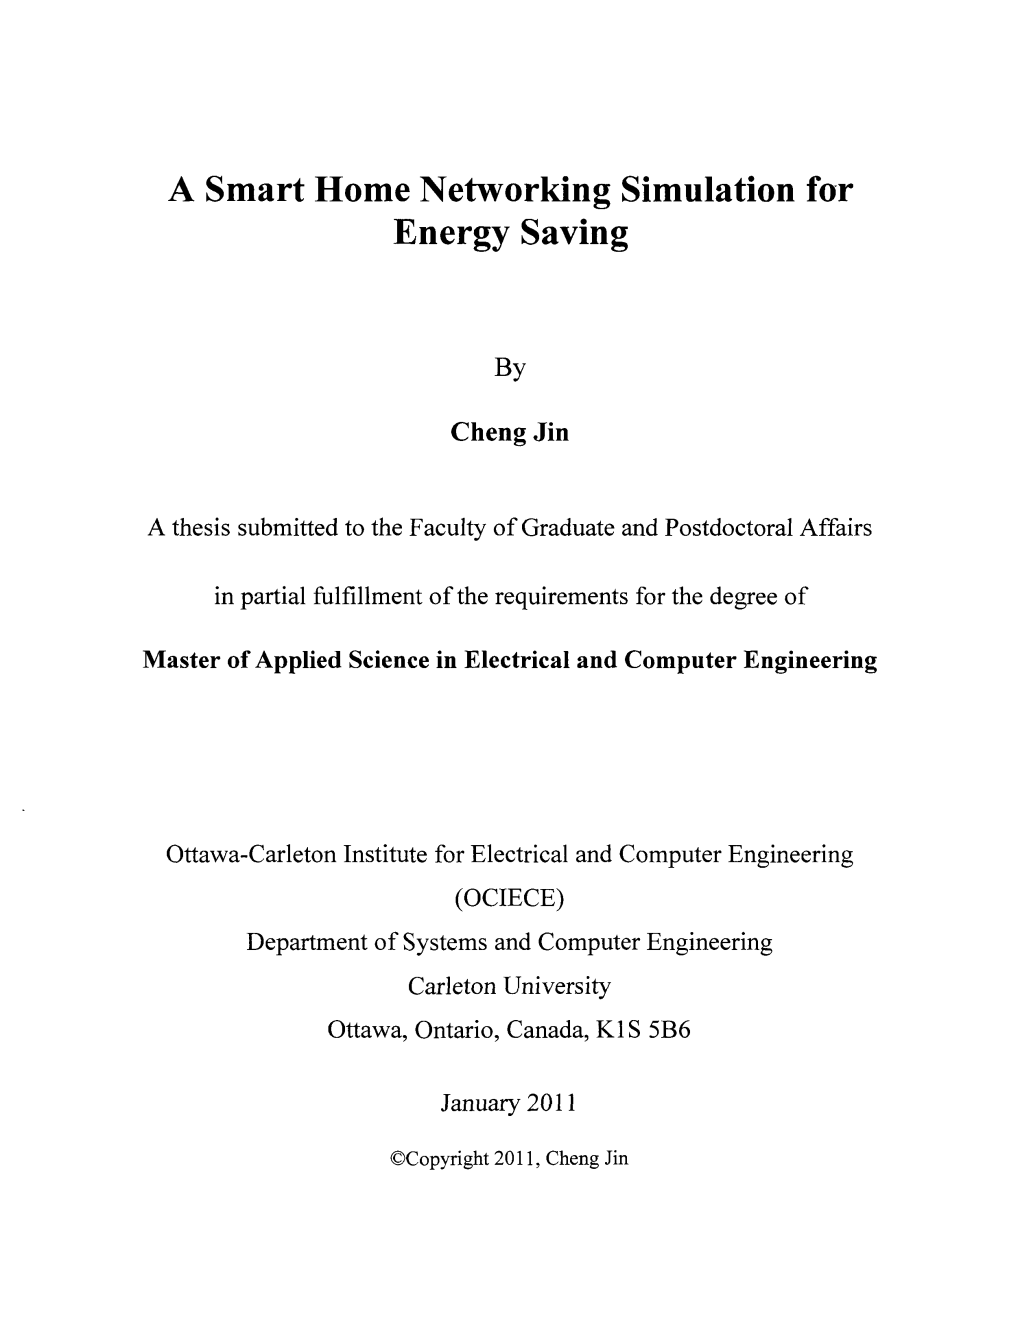 A Smart Home Networking Simulation for Energy Saving